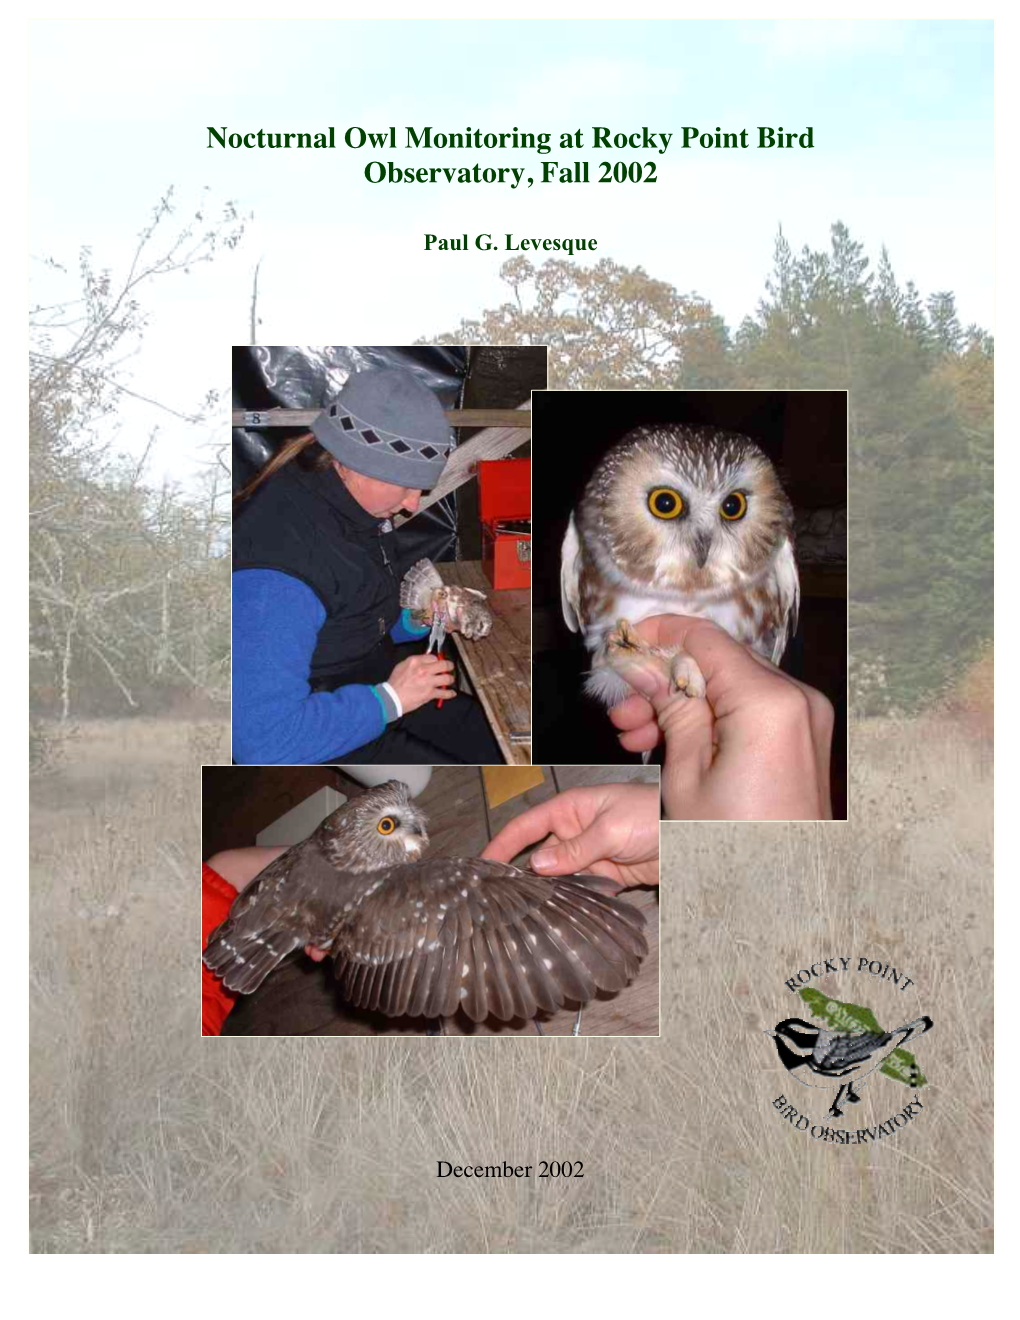 Nocturnal Owl Monitoring at Rocky Point Bird Observatory, Fall 2002